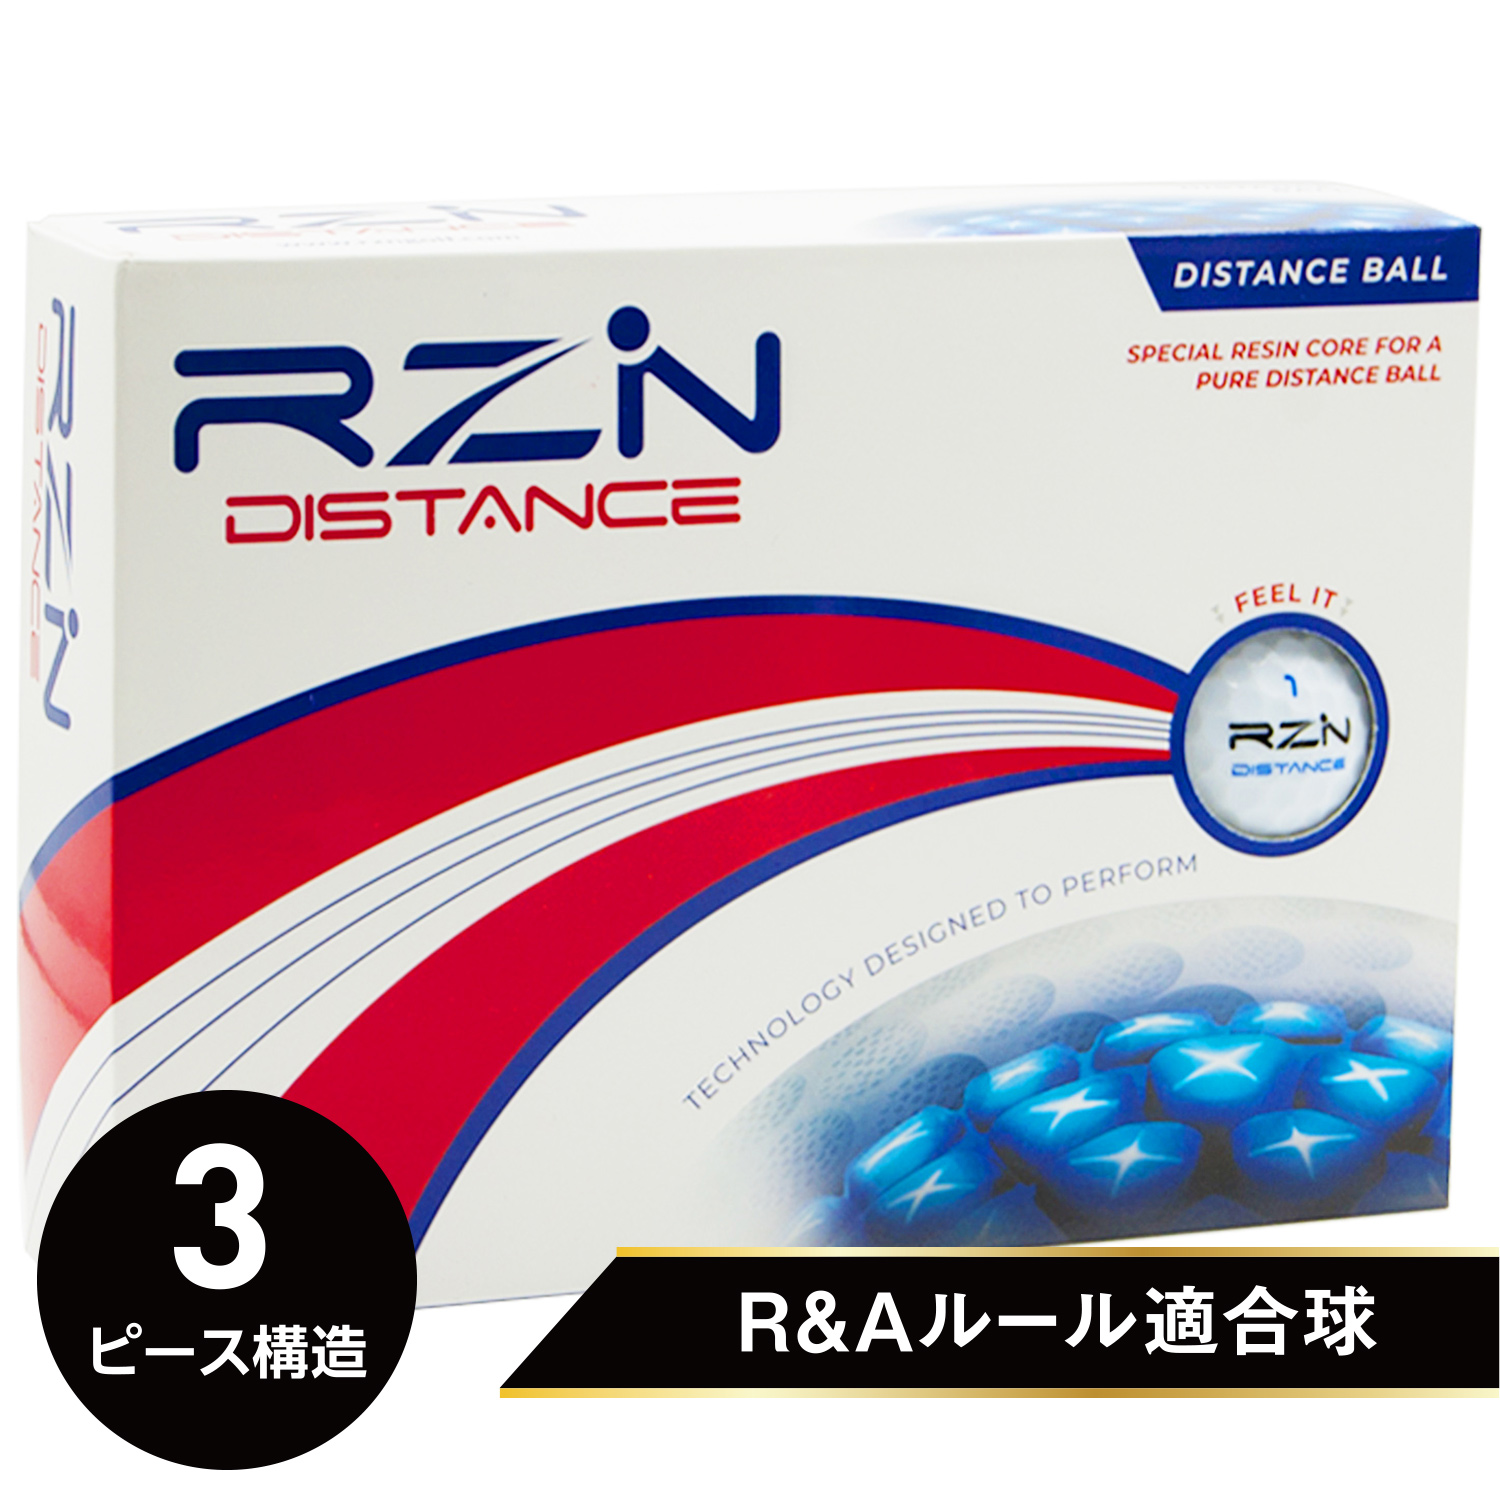 RZN DISTANCE ― 柔らかな打感で飛距離を伸ばすスピードロック